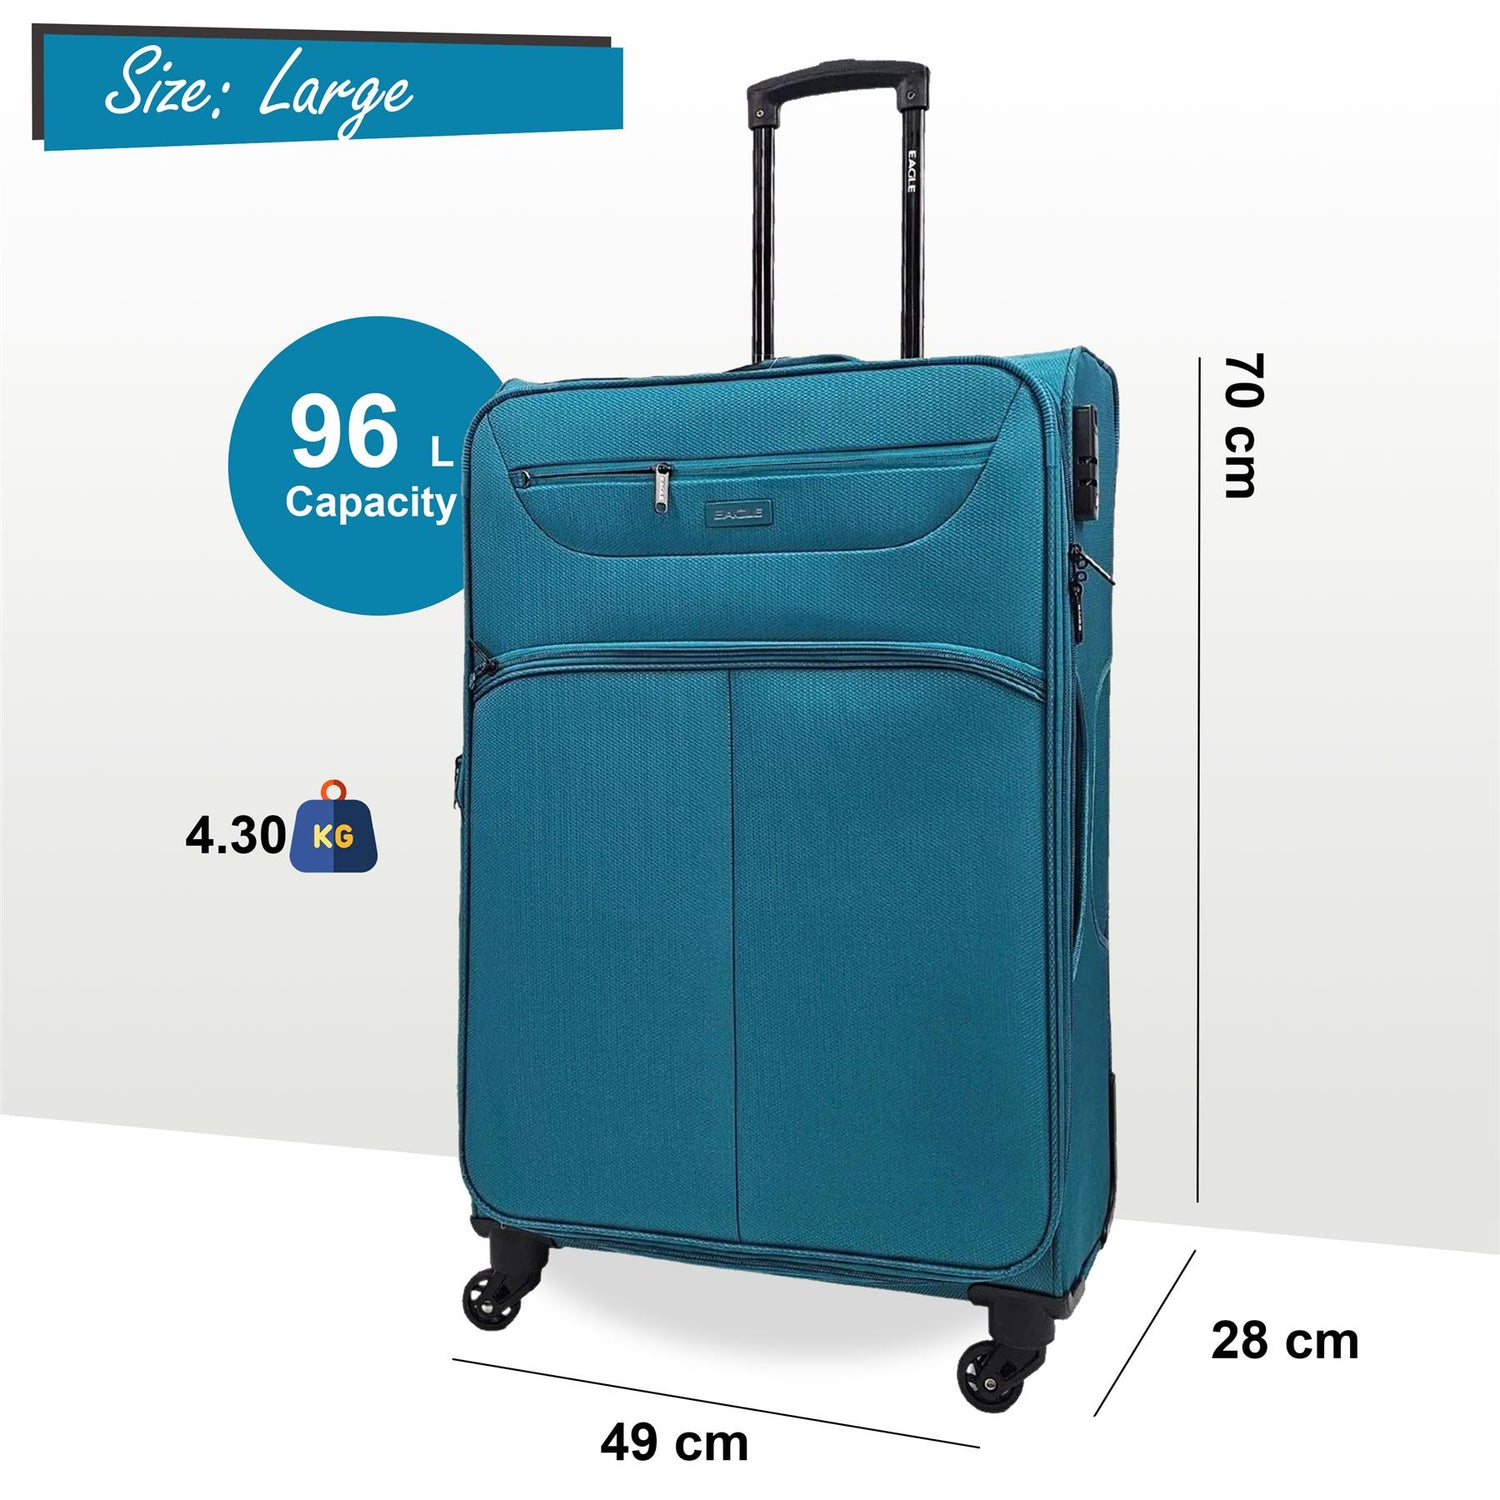 Baileyton Large Soft Shell Suitcase in Teal